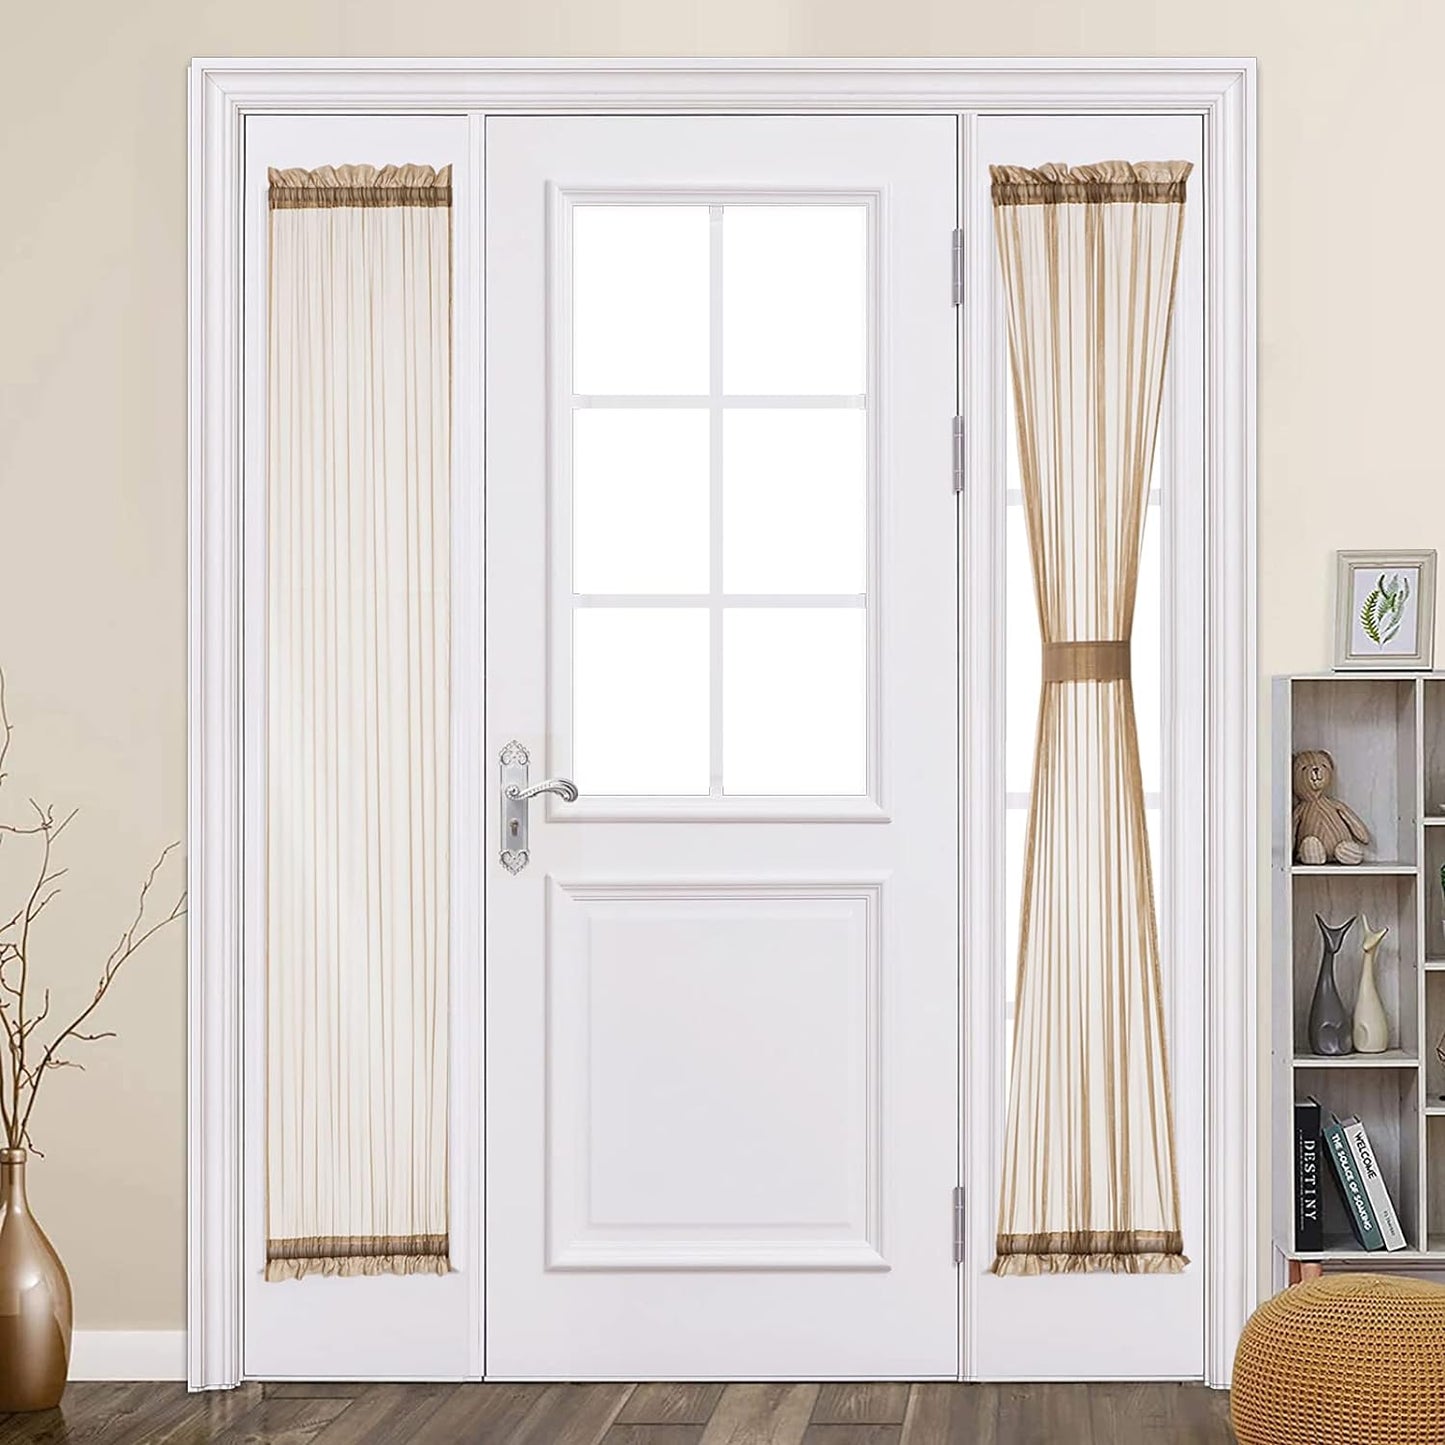 MIULEE French Door Sheer Curtains for Front Back Patio Glass Door Light Filtering Window Treatment with 2 Tiebacks 54 Wide and 72 Inches Length, White, Set of 2  MIULEE Brown 25"W X 72"L 